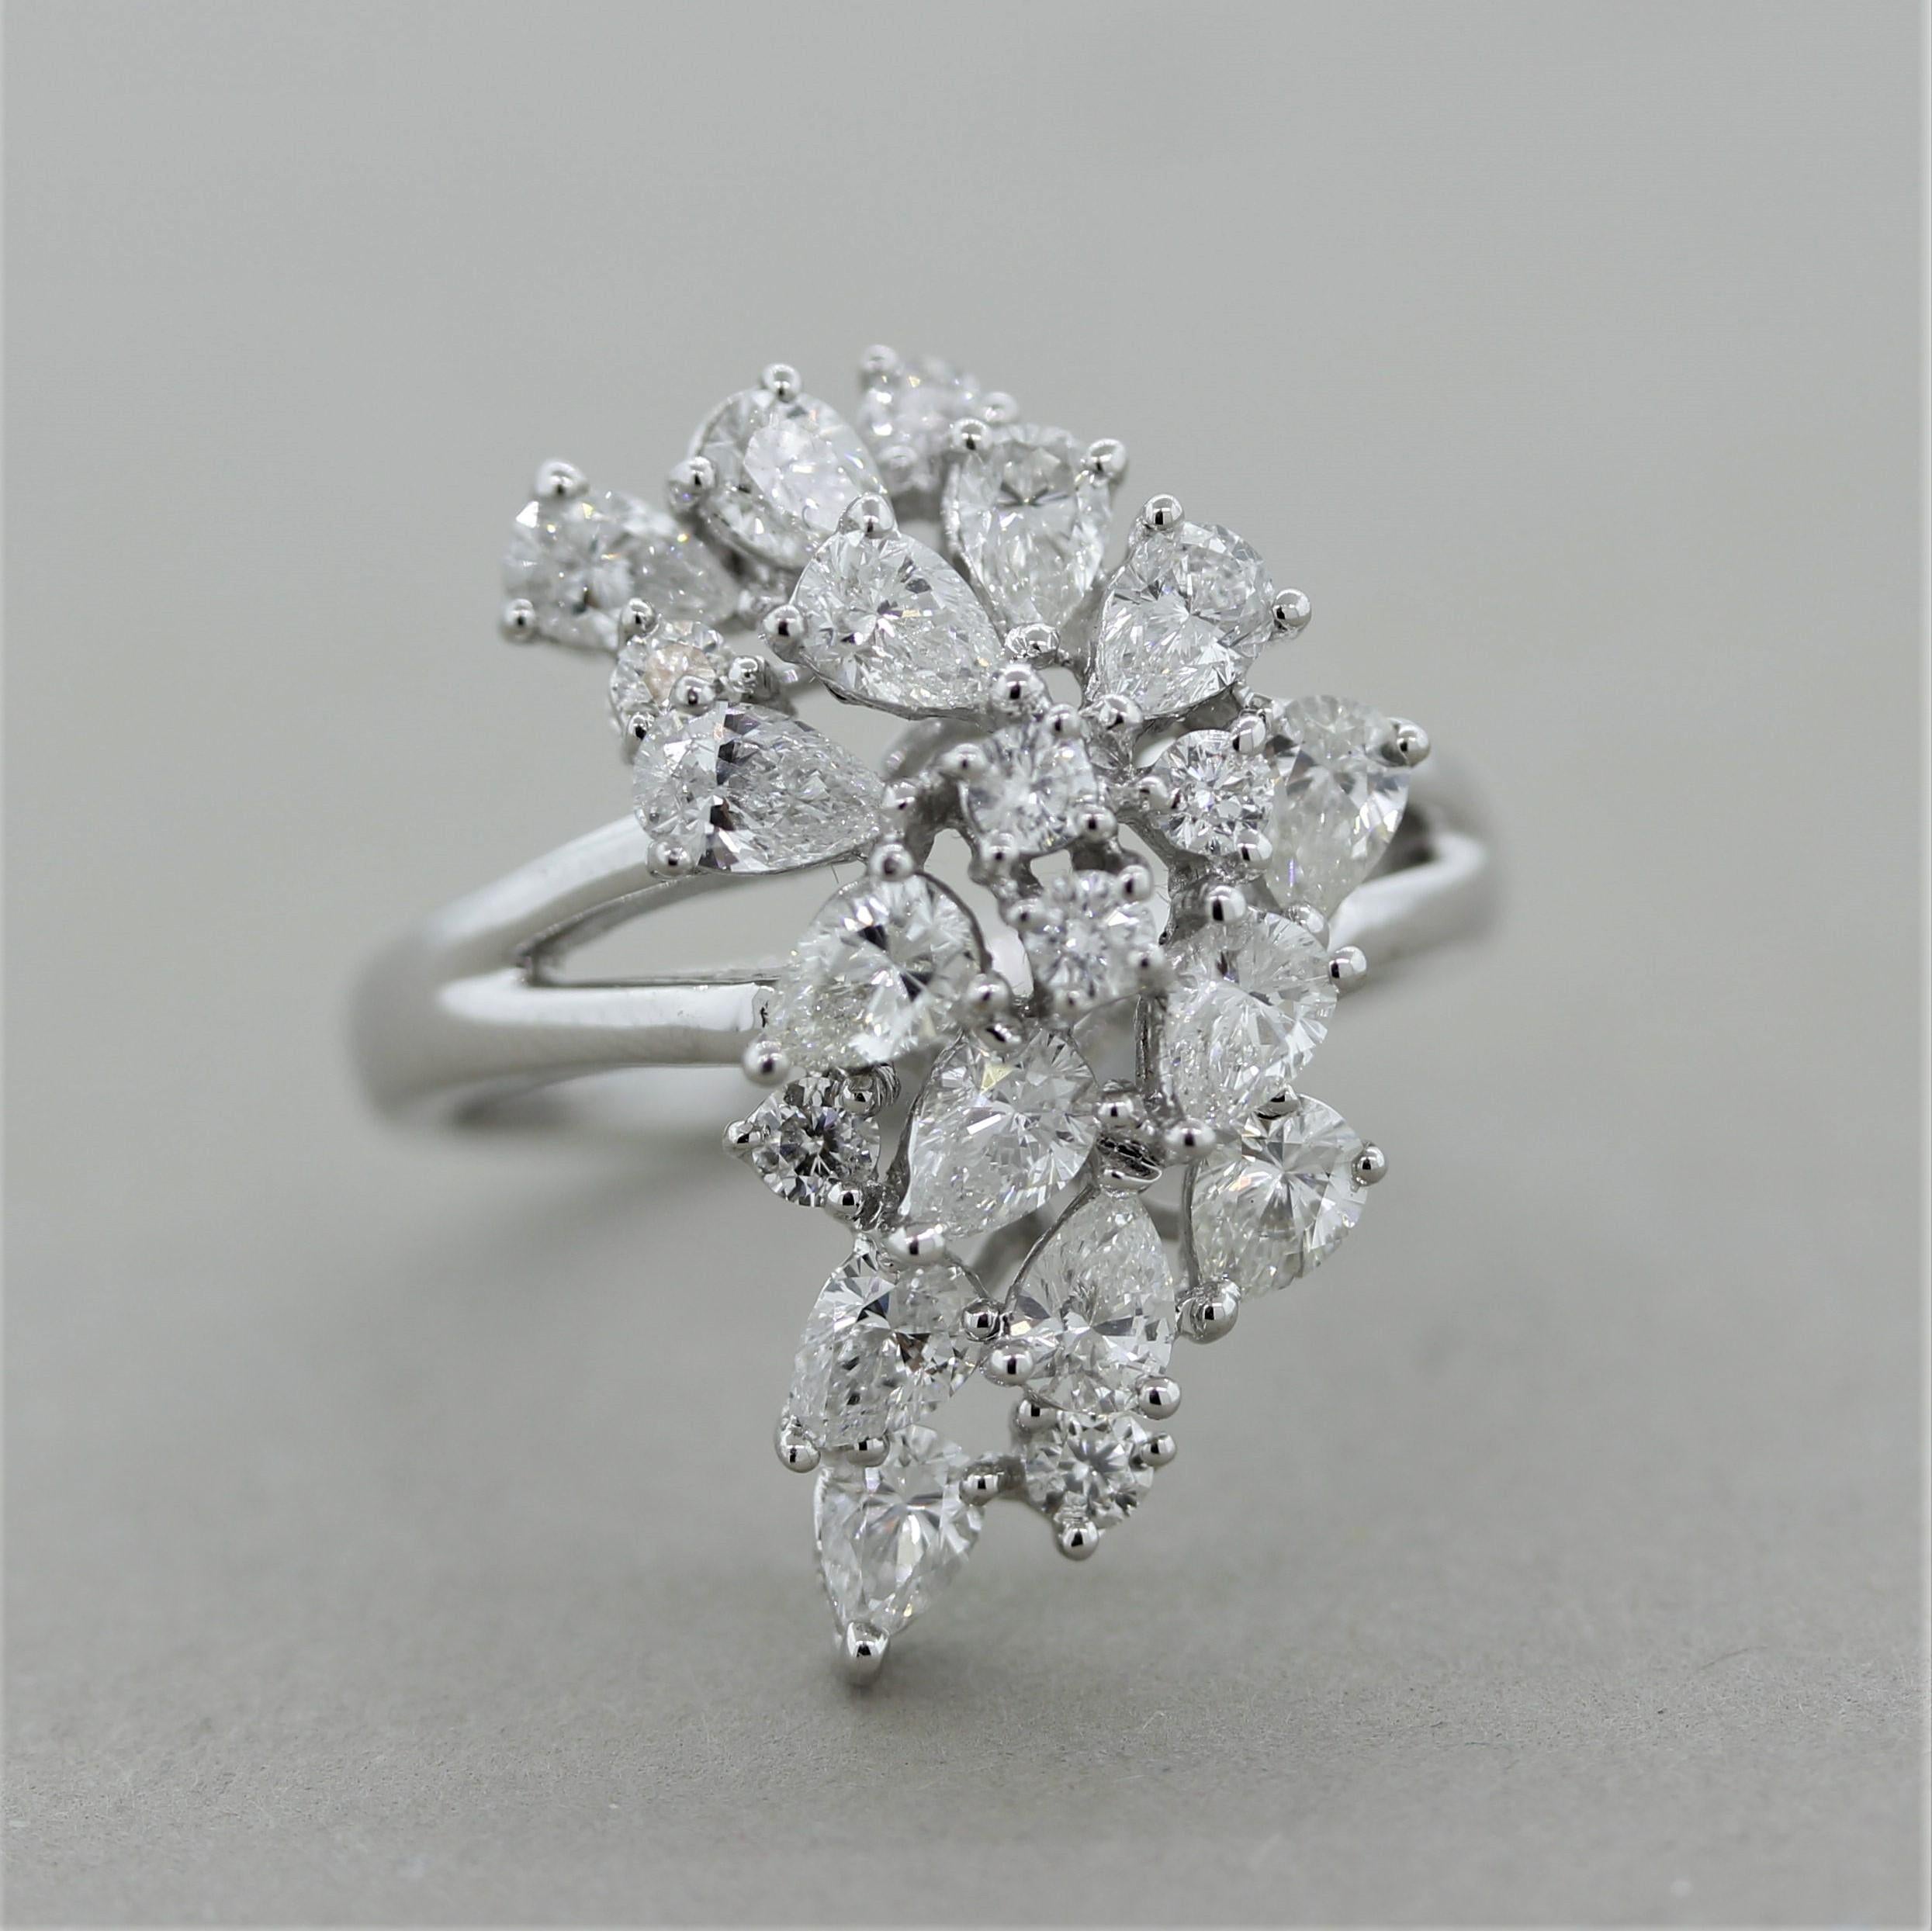 A classic diamond spray ring featuring 2.66 carats of larger diamond which include round brilliant and pear-shaped diamonds. They are set in a cluster/spray pattern in a cascading design. Made in 18k white gold and ready to be worn!

Ring Size 7